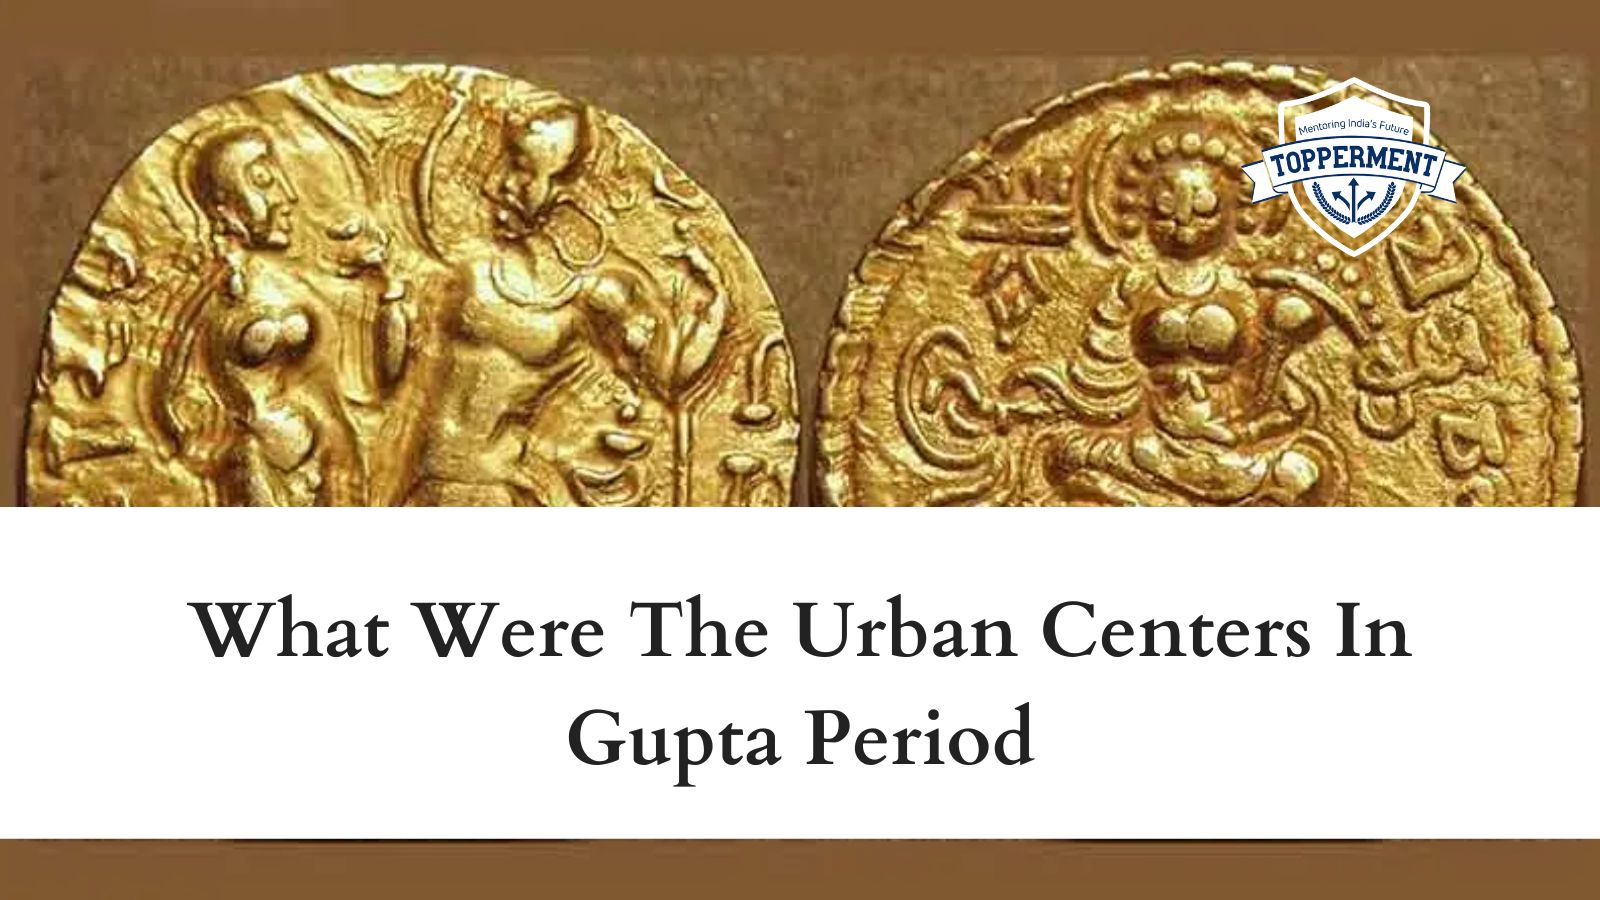 What-Were-The-Urban-Centers-In-Gupta-Period-Best-UPSC-IAS-Coaching-For-Mentorship-And-Guidance